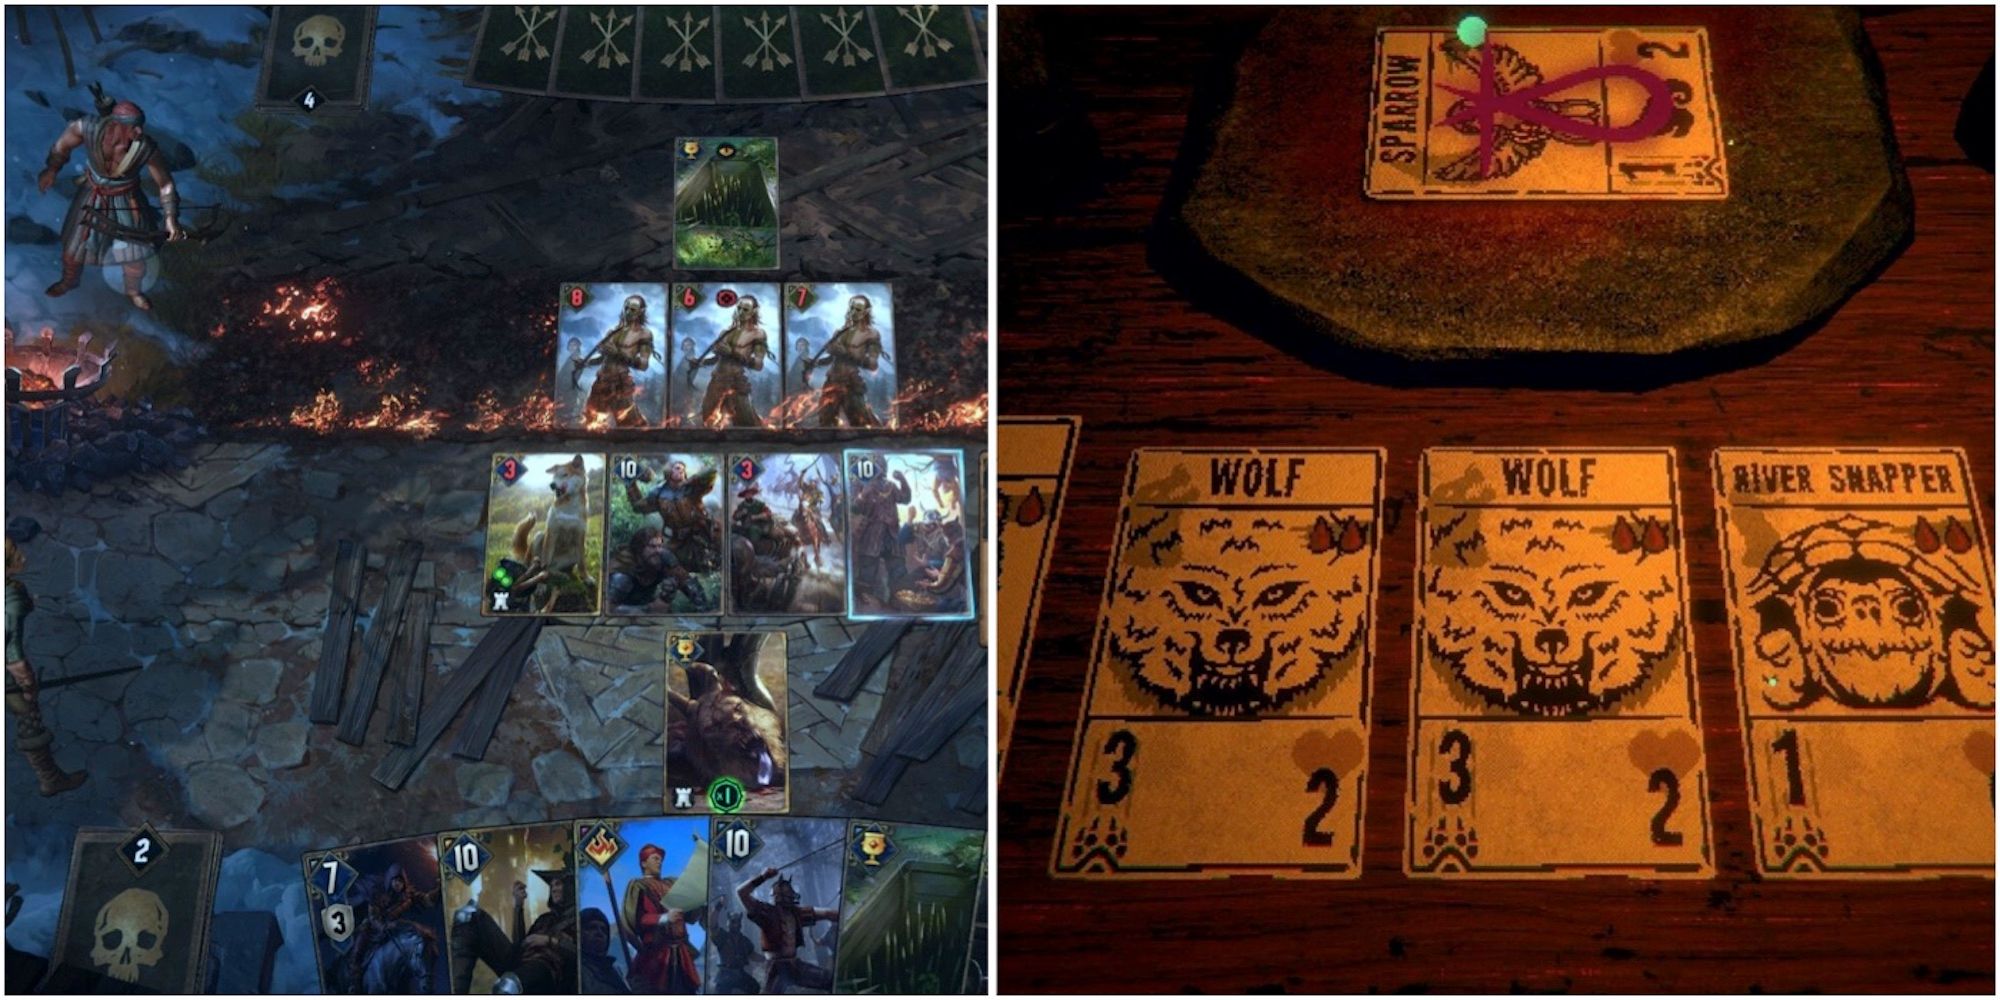 Playing a match in Thronebreaker The Witcher Tales and Inscryption